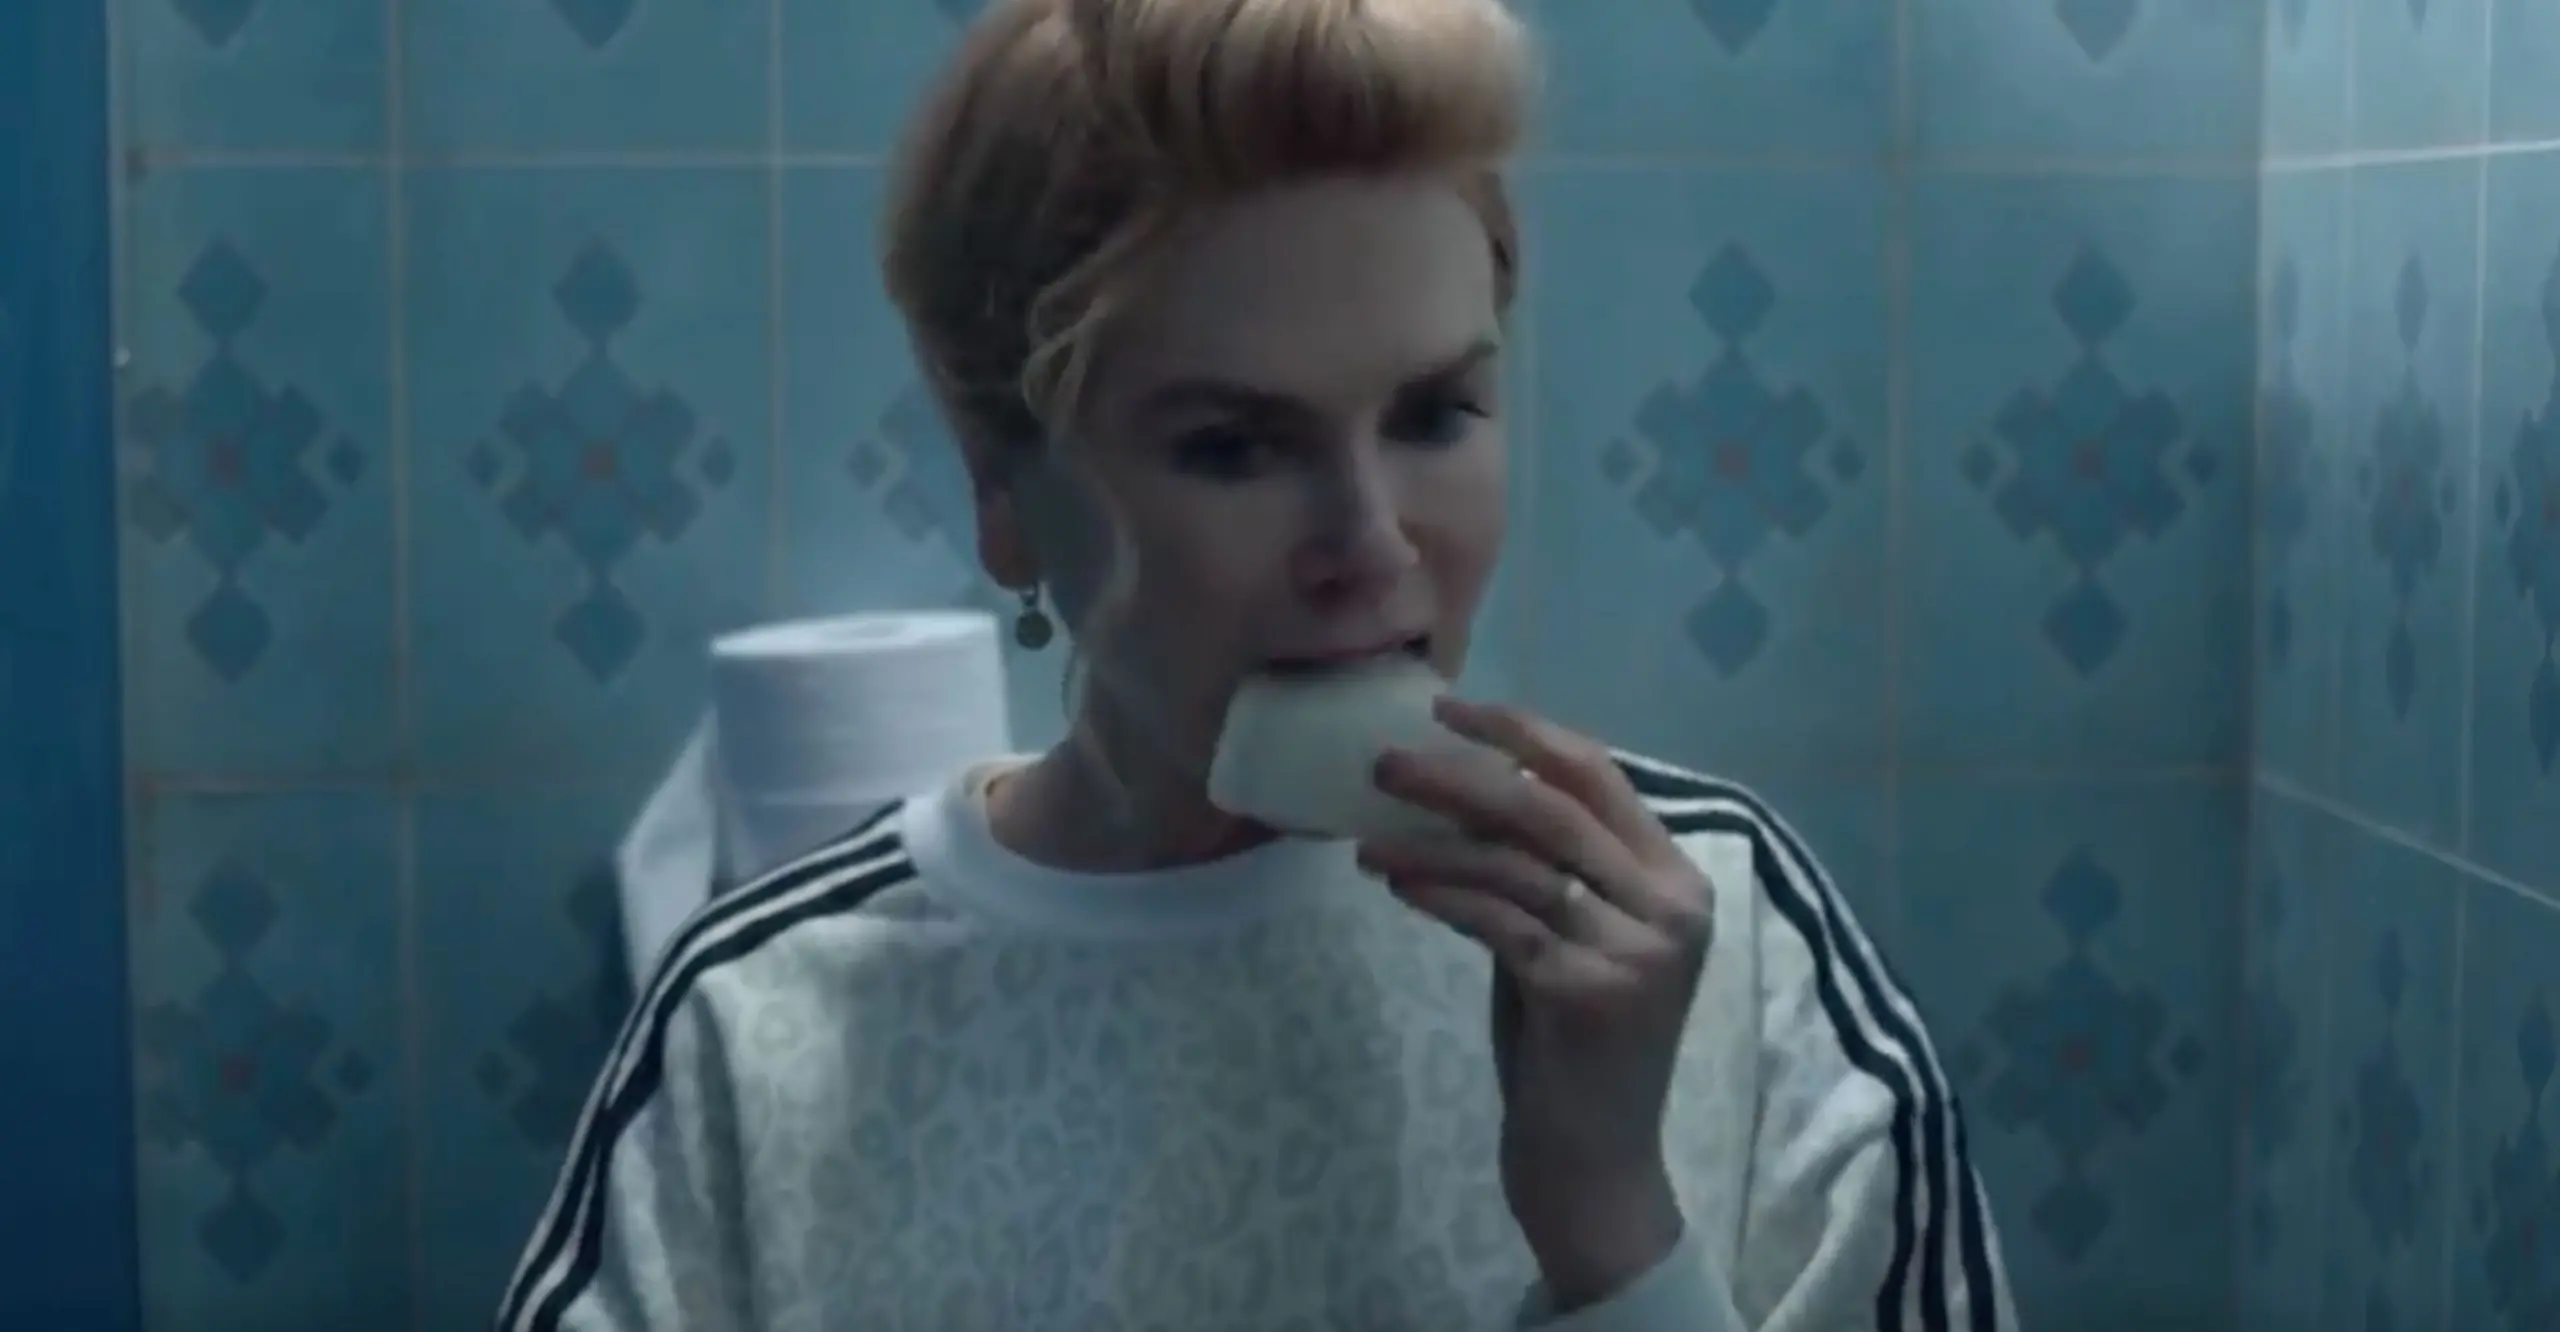 A still image of a tv show in which actress Nicole Kidman is eating a photograph in a bathroom